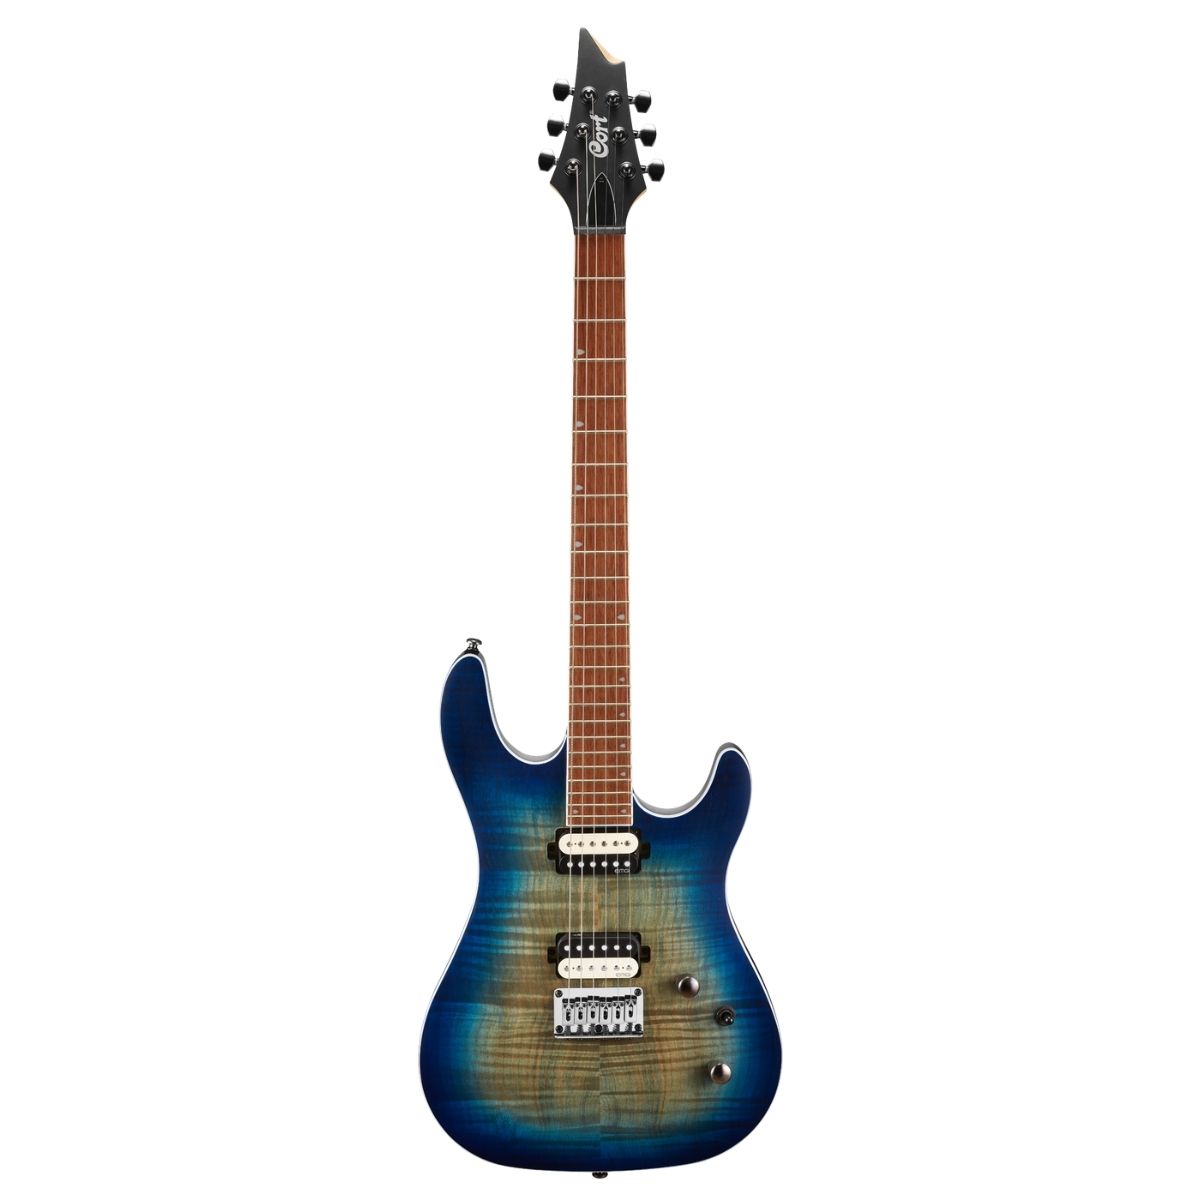 Cort KX300 Electric Guitar online price in india